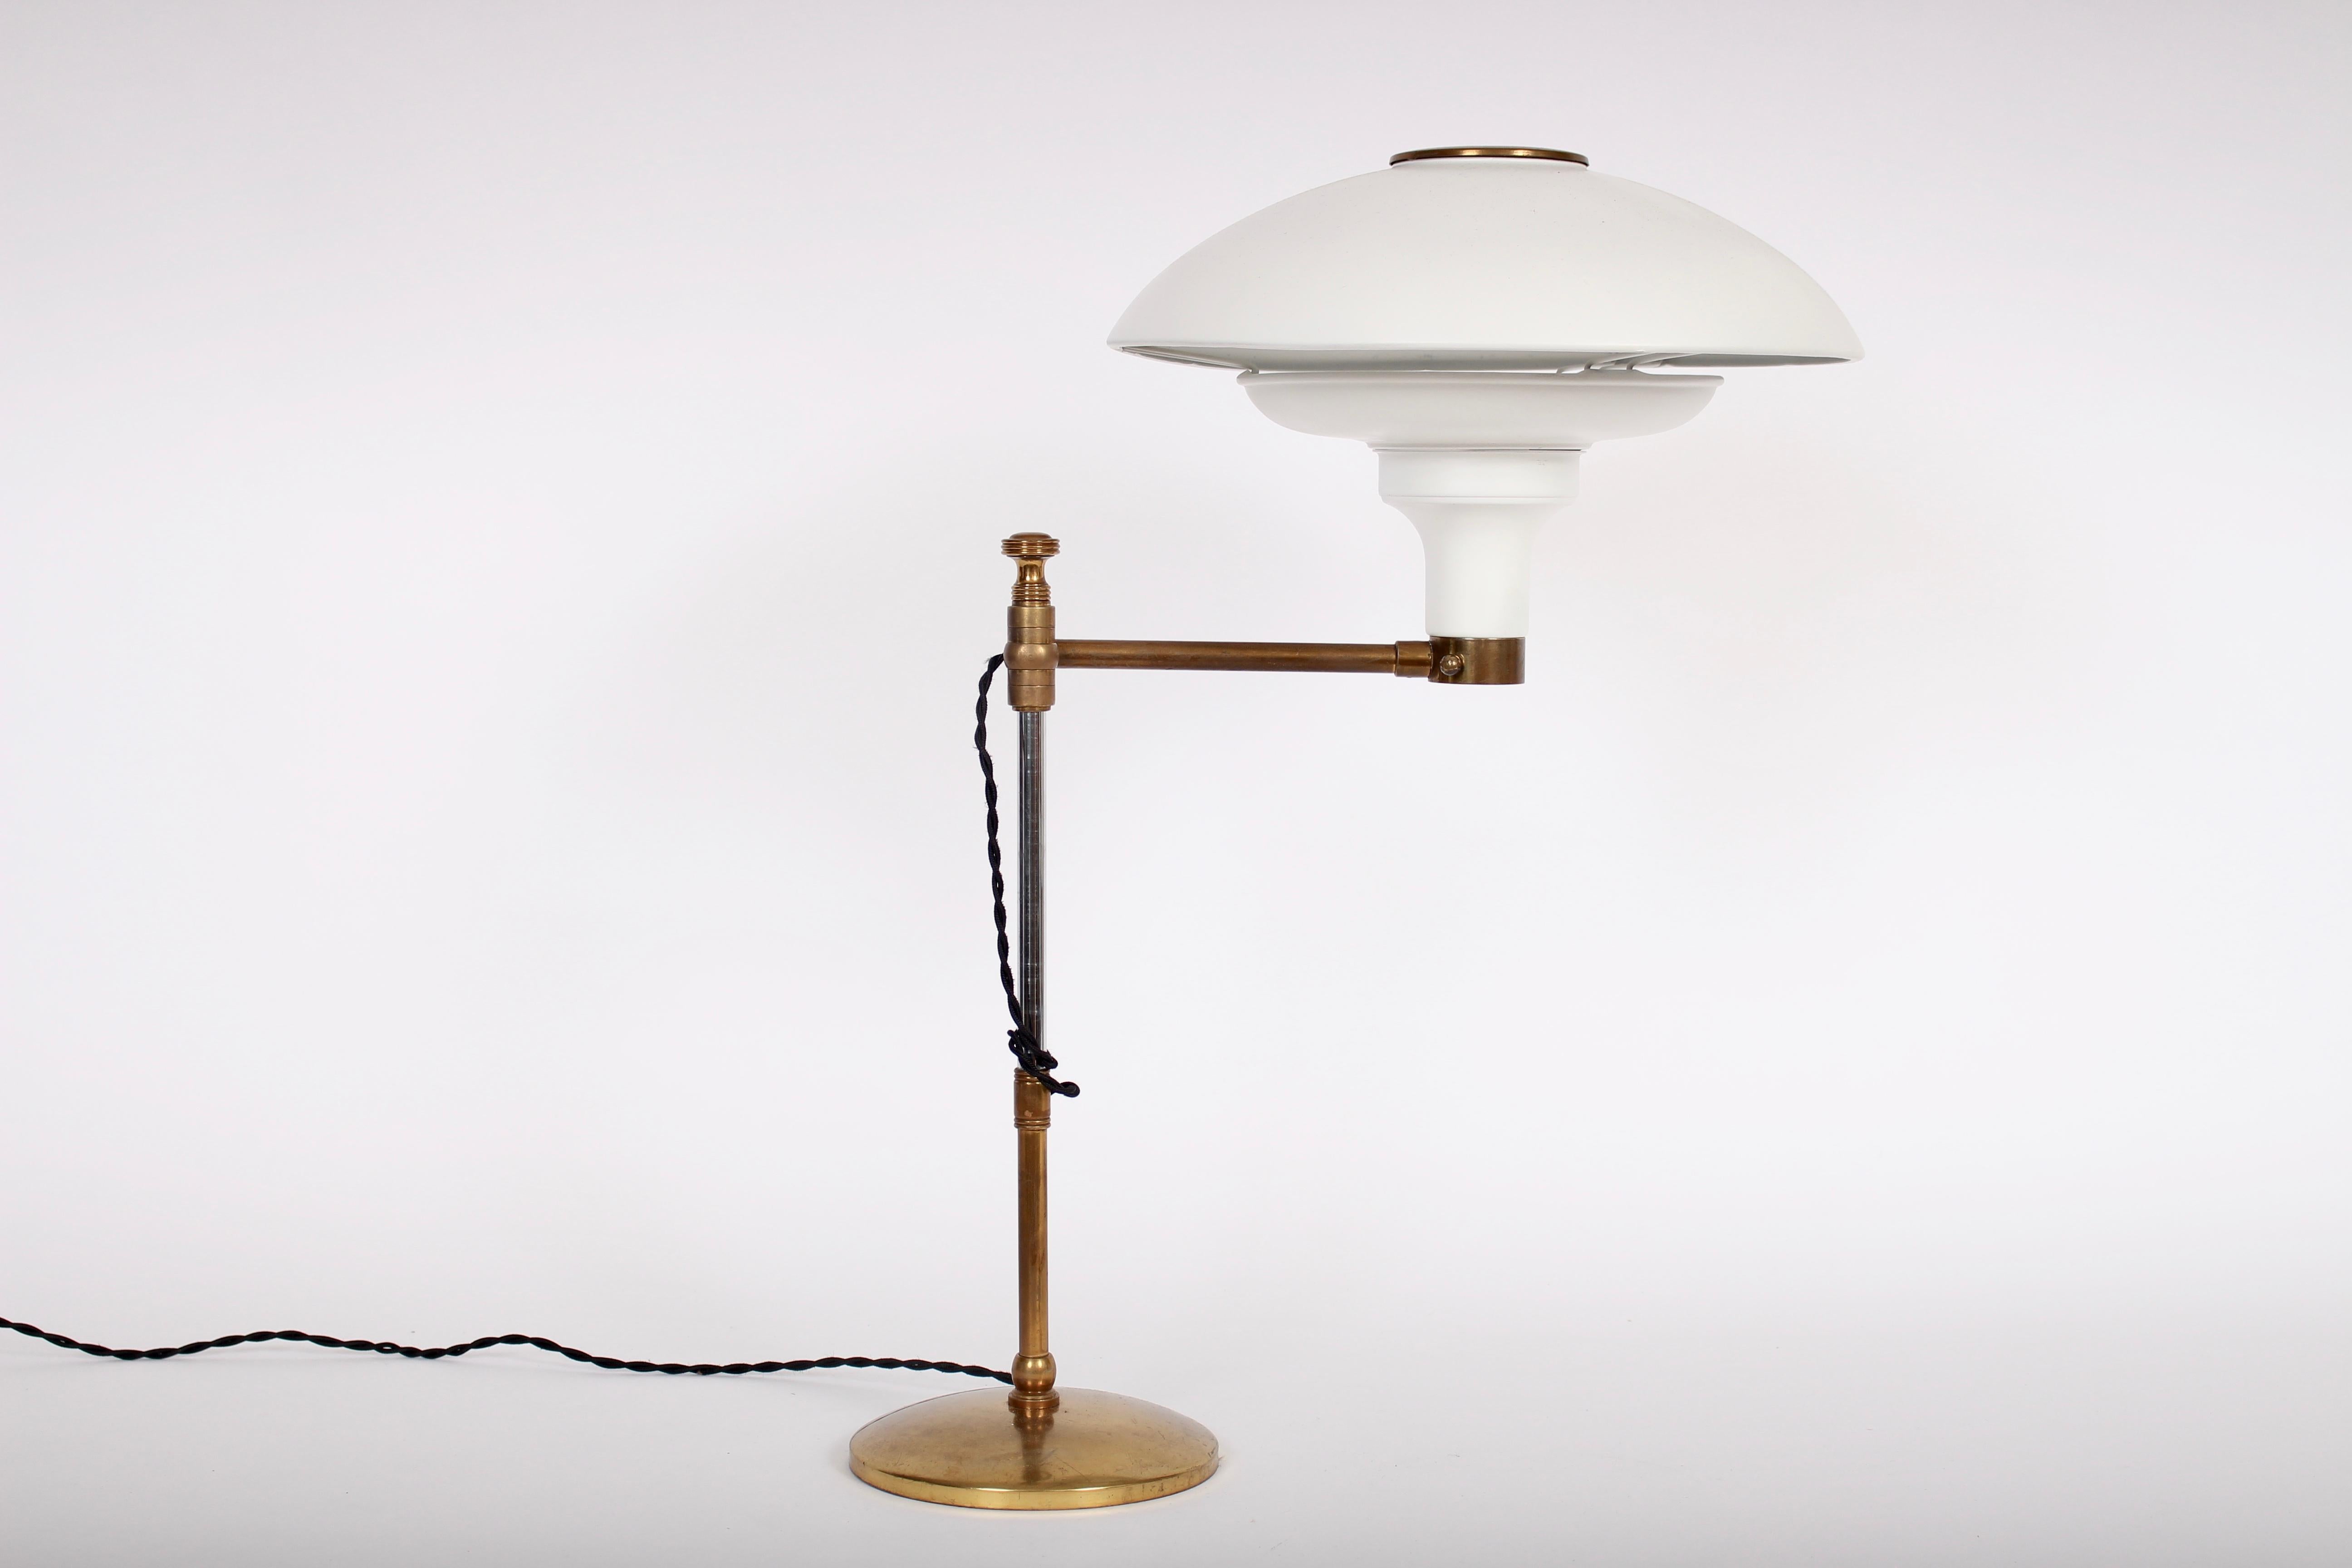 Large Art Deco Dazor attributed White Swing Arm Table Lamp with Brass details. Featuring a metal reflector perforated saucer shade, adjustable stem, swing arm, brass details and bright brass 6.5D base. Standard socket. 